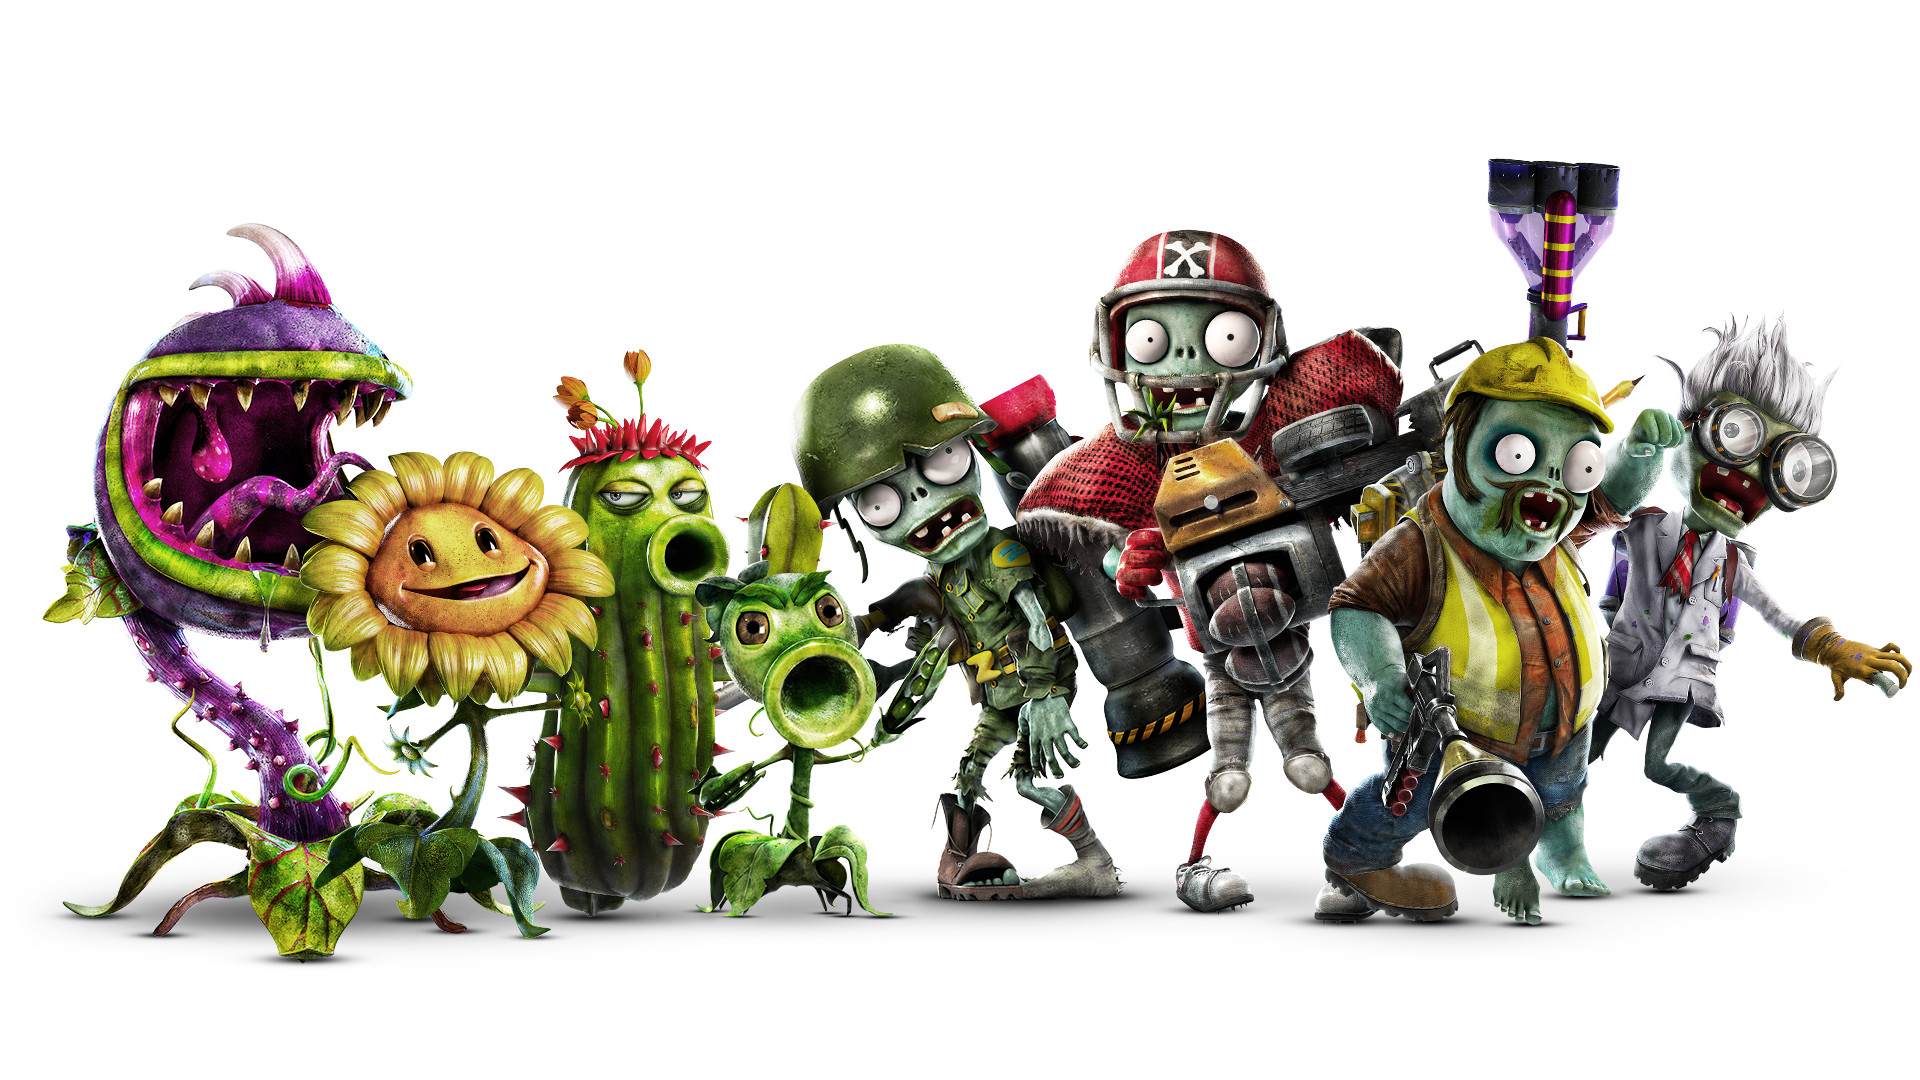 Plants vs zombies garden warfare 2 review roses are dead, violence ensues. 